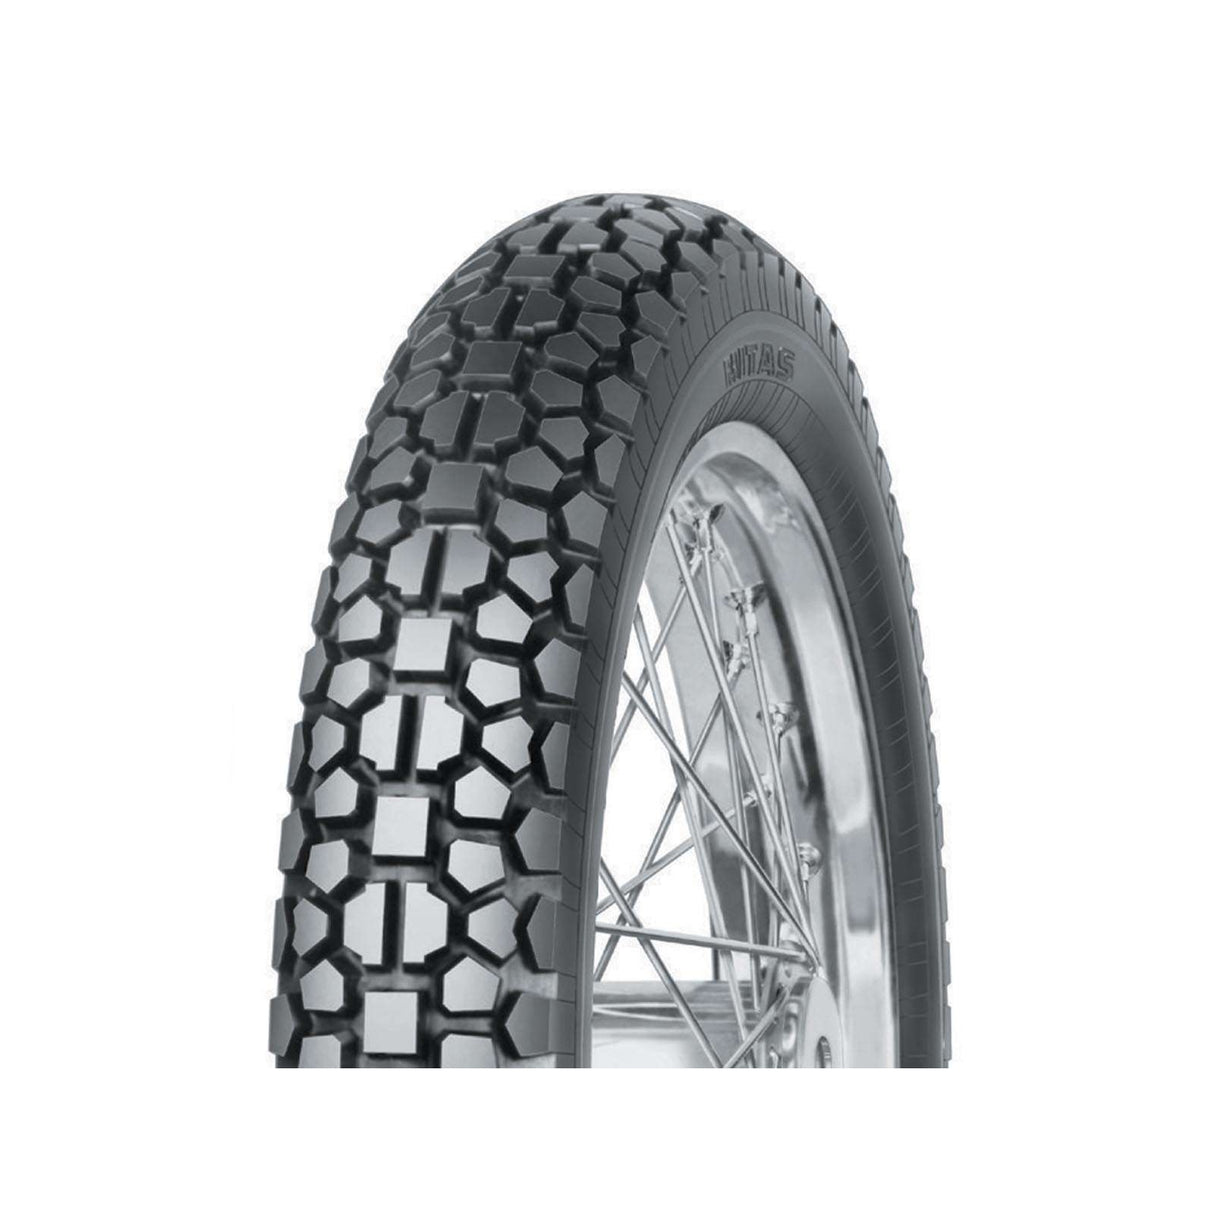 3.50-18 E03 Classic Reinf. Mitas Trails Rear Tyre